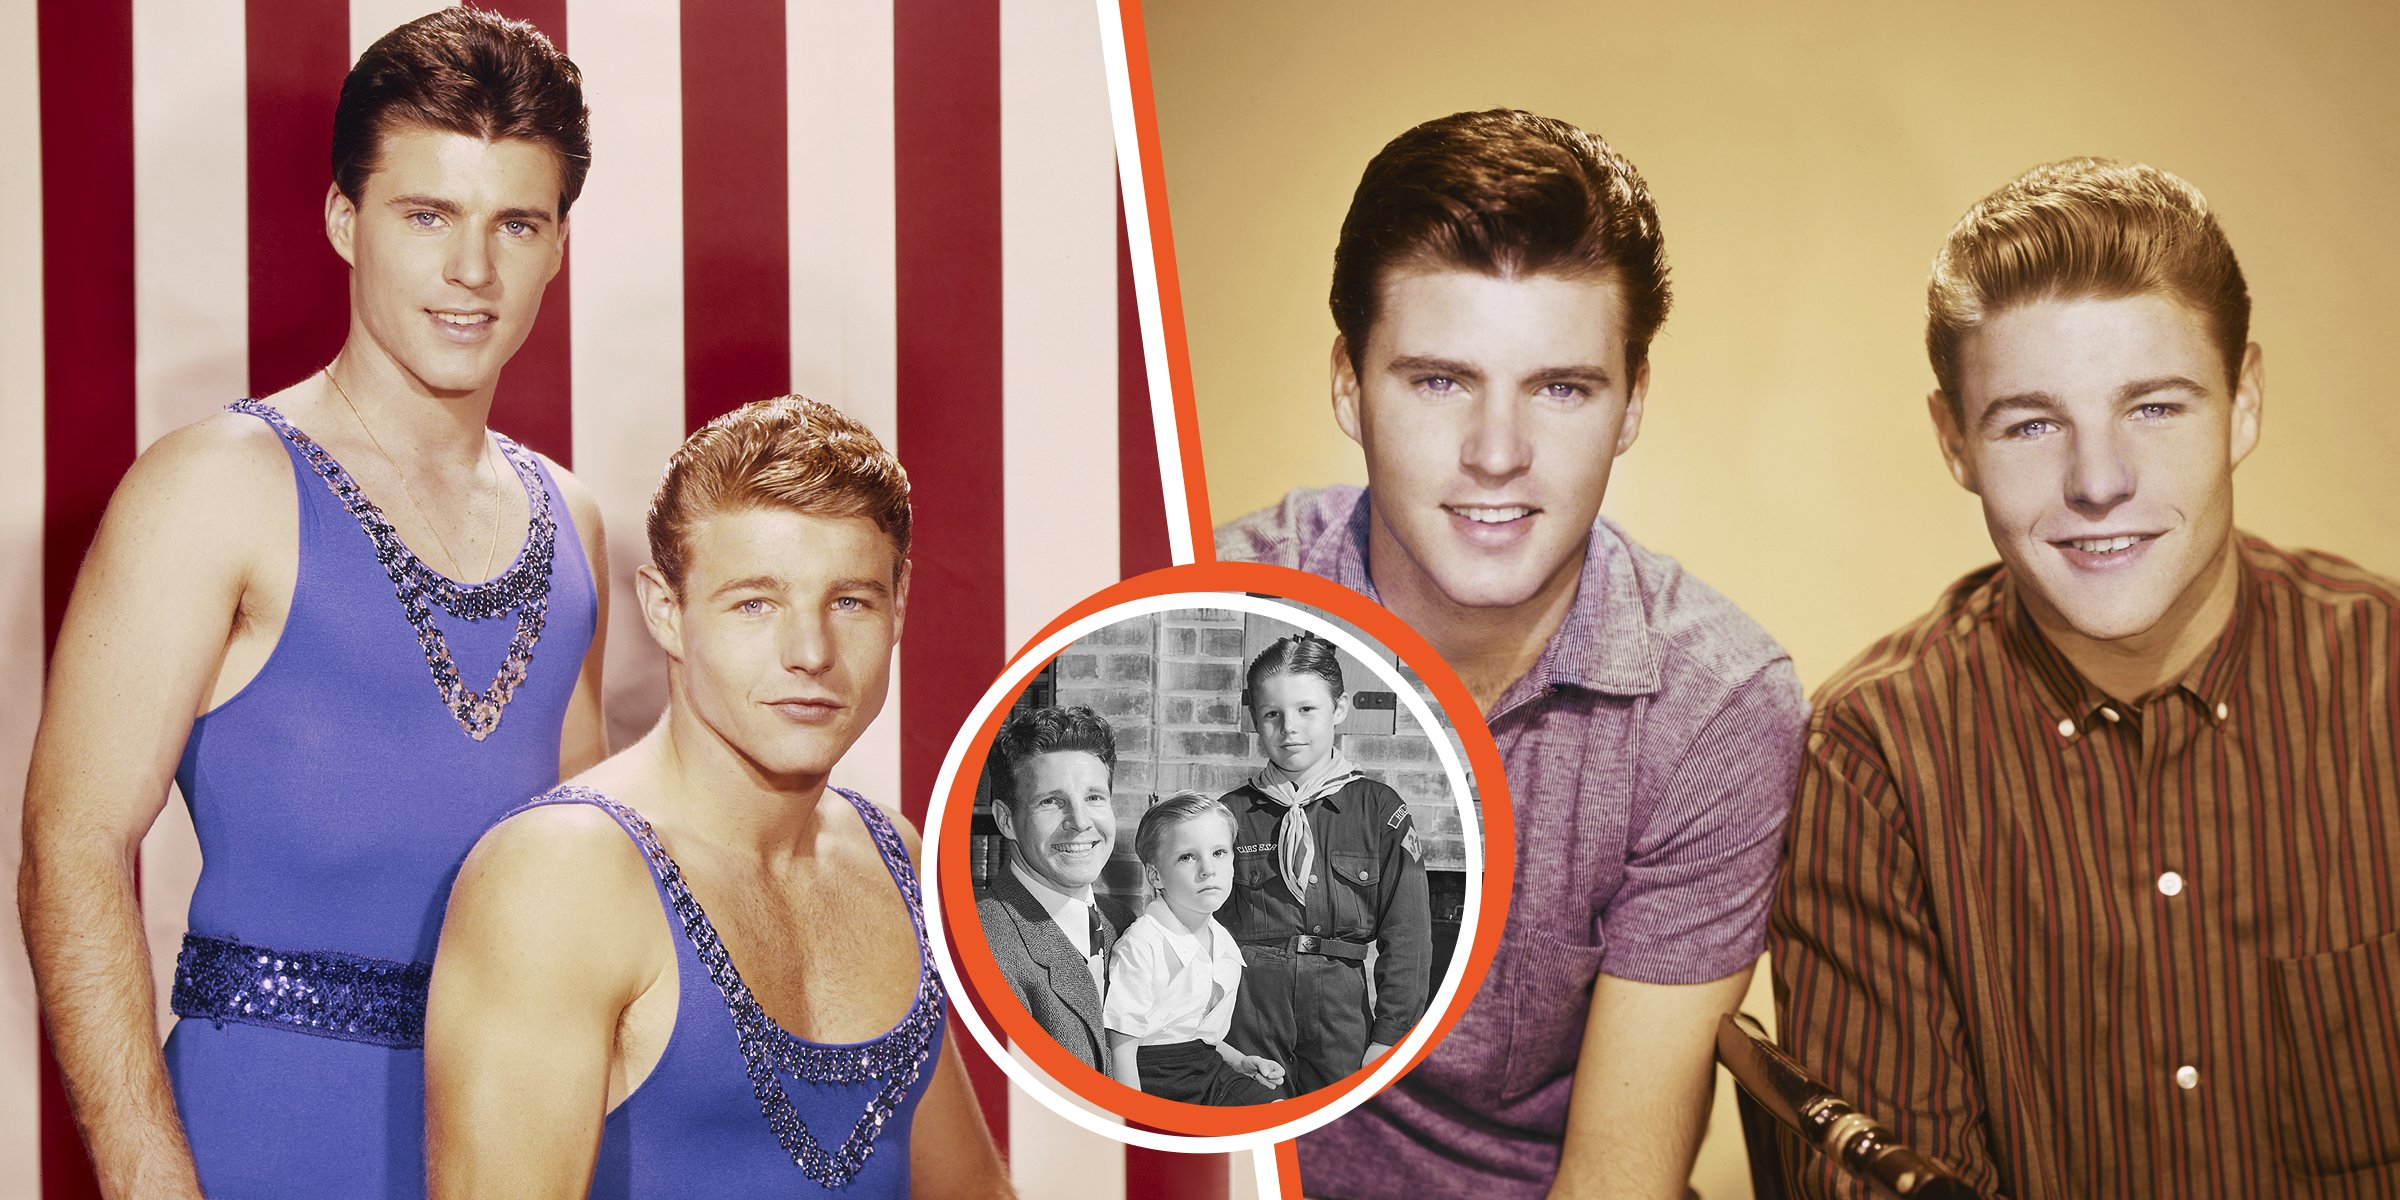 Ricky Nelson and David Nelson, 1960 | Ozzie Nelson, Ricky Nelson, and David Nelson, 1946 | David Nelson and Ricky Nelson, 1957 | Source: Getty Images